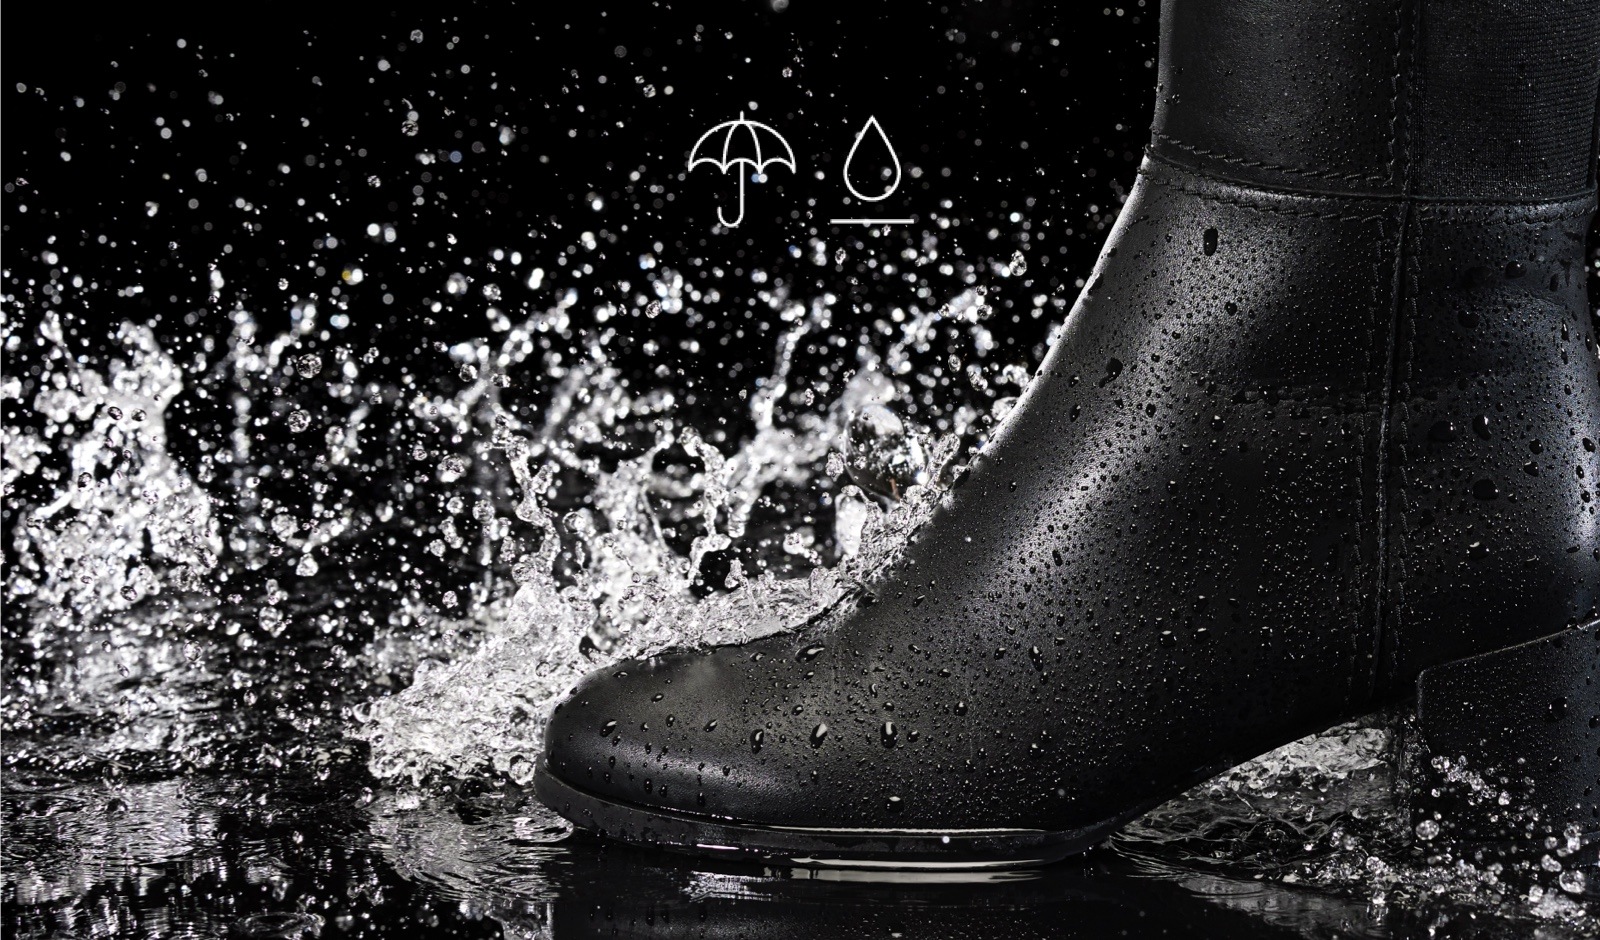 Stay dry with Waterproof and Water repellent shoes by naturalizer